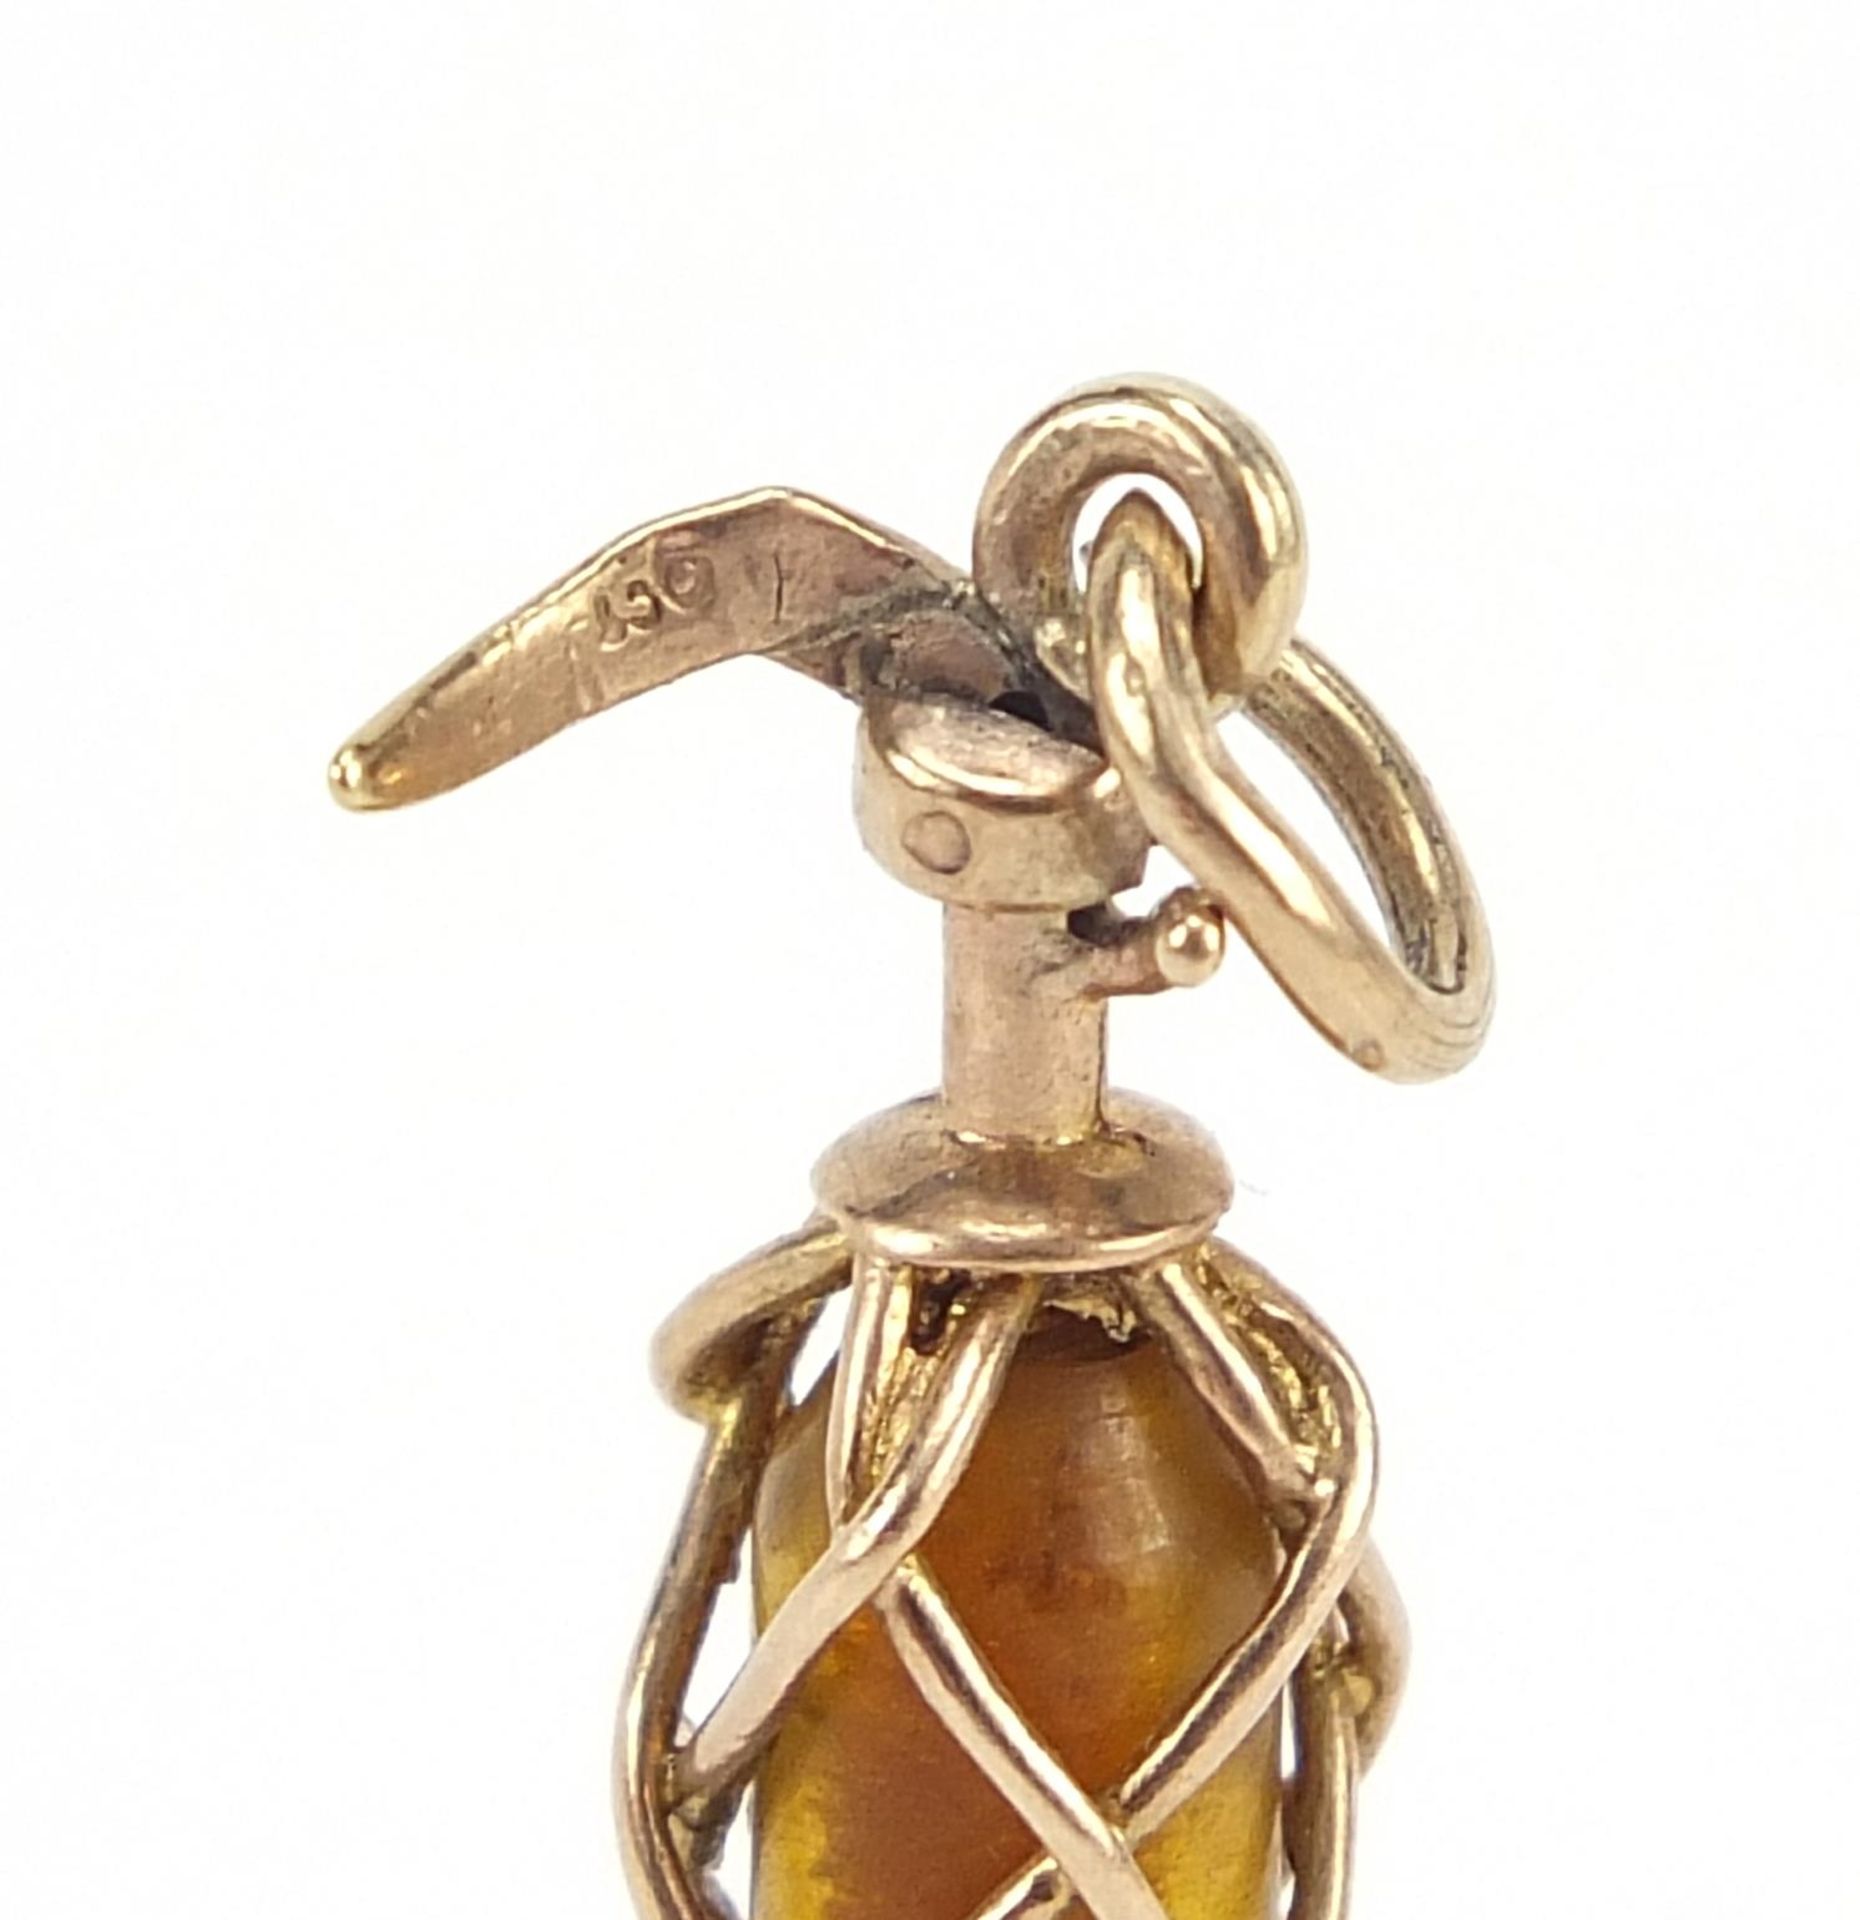 9ct gold soda syphon charm, 2.6cm high, 1.6g - Image 7 of 8